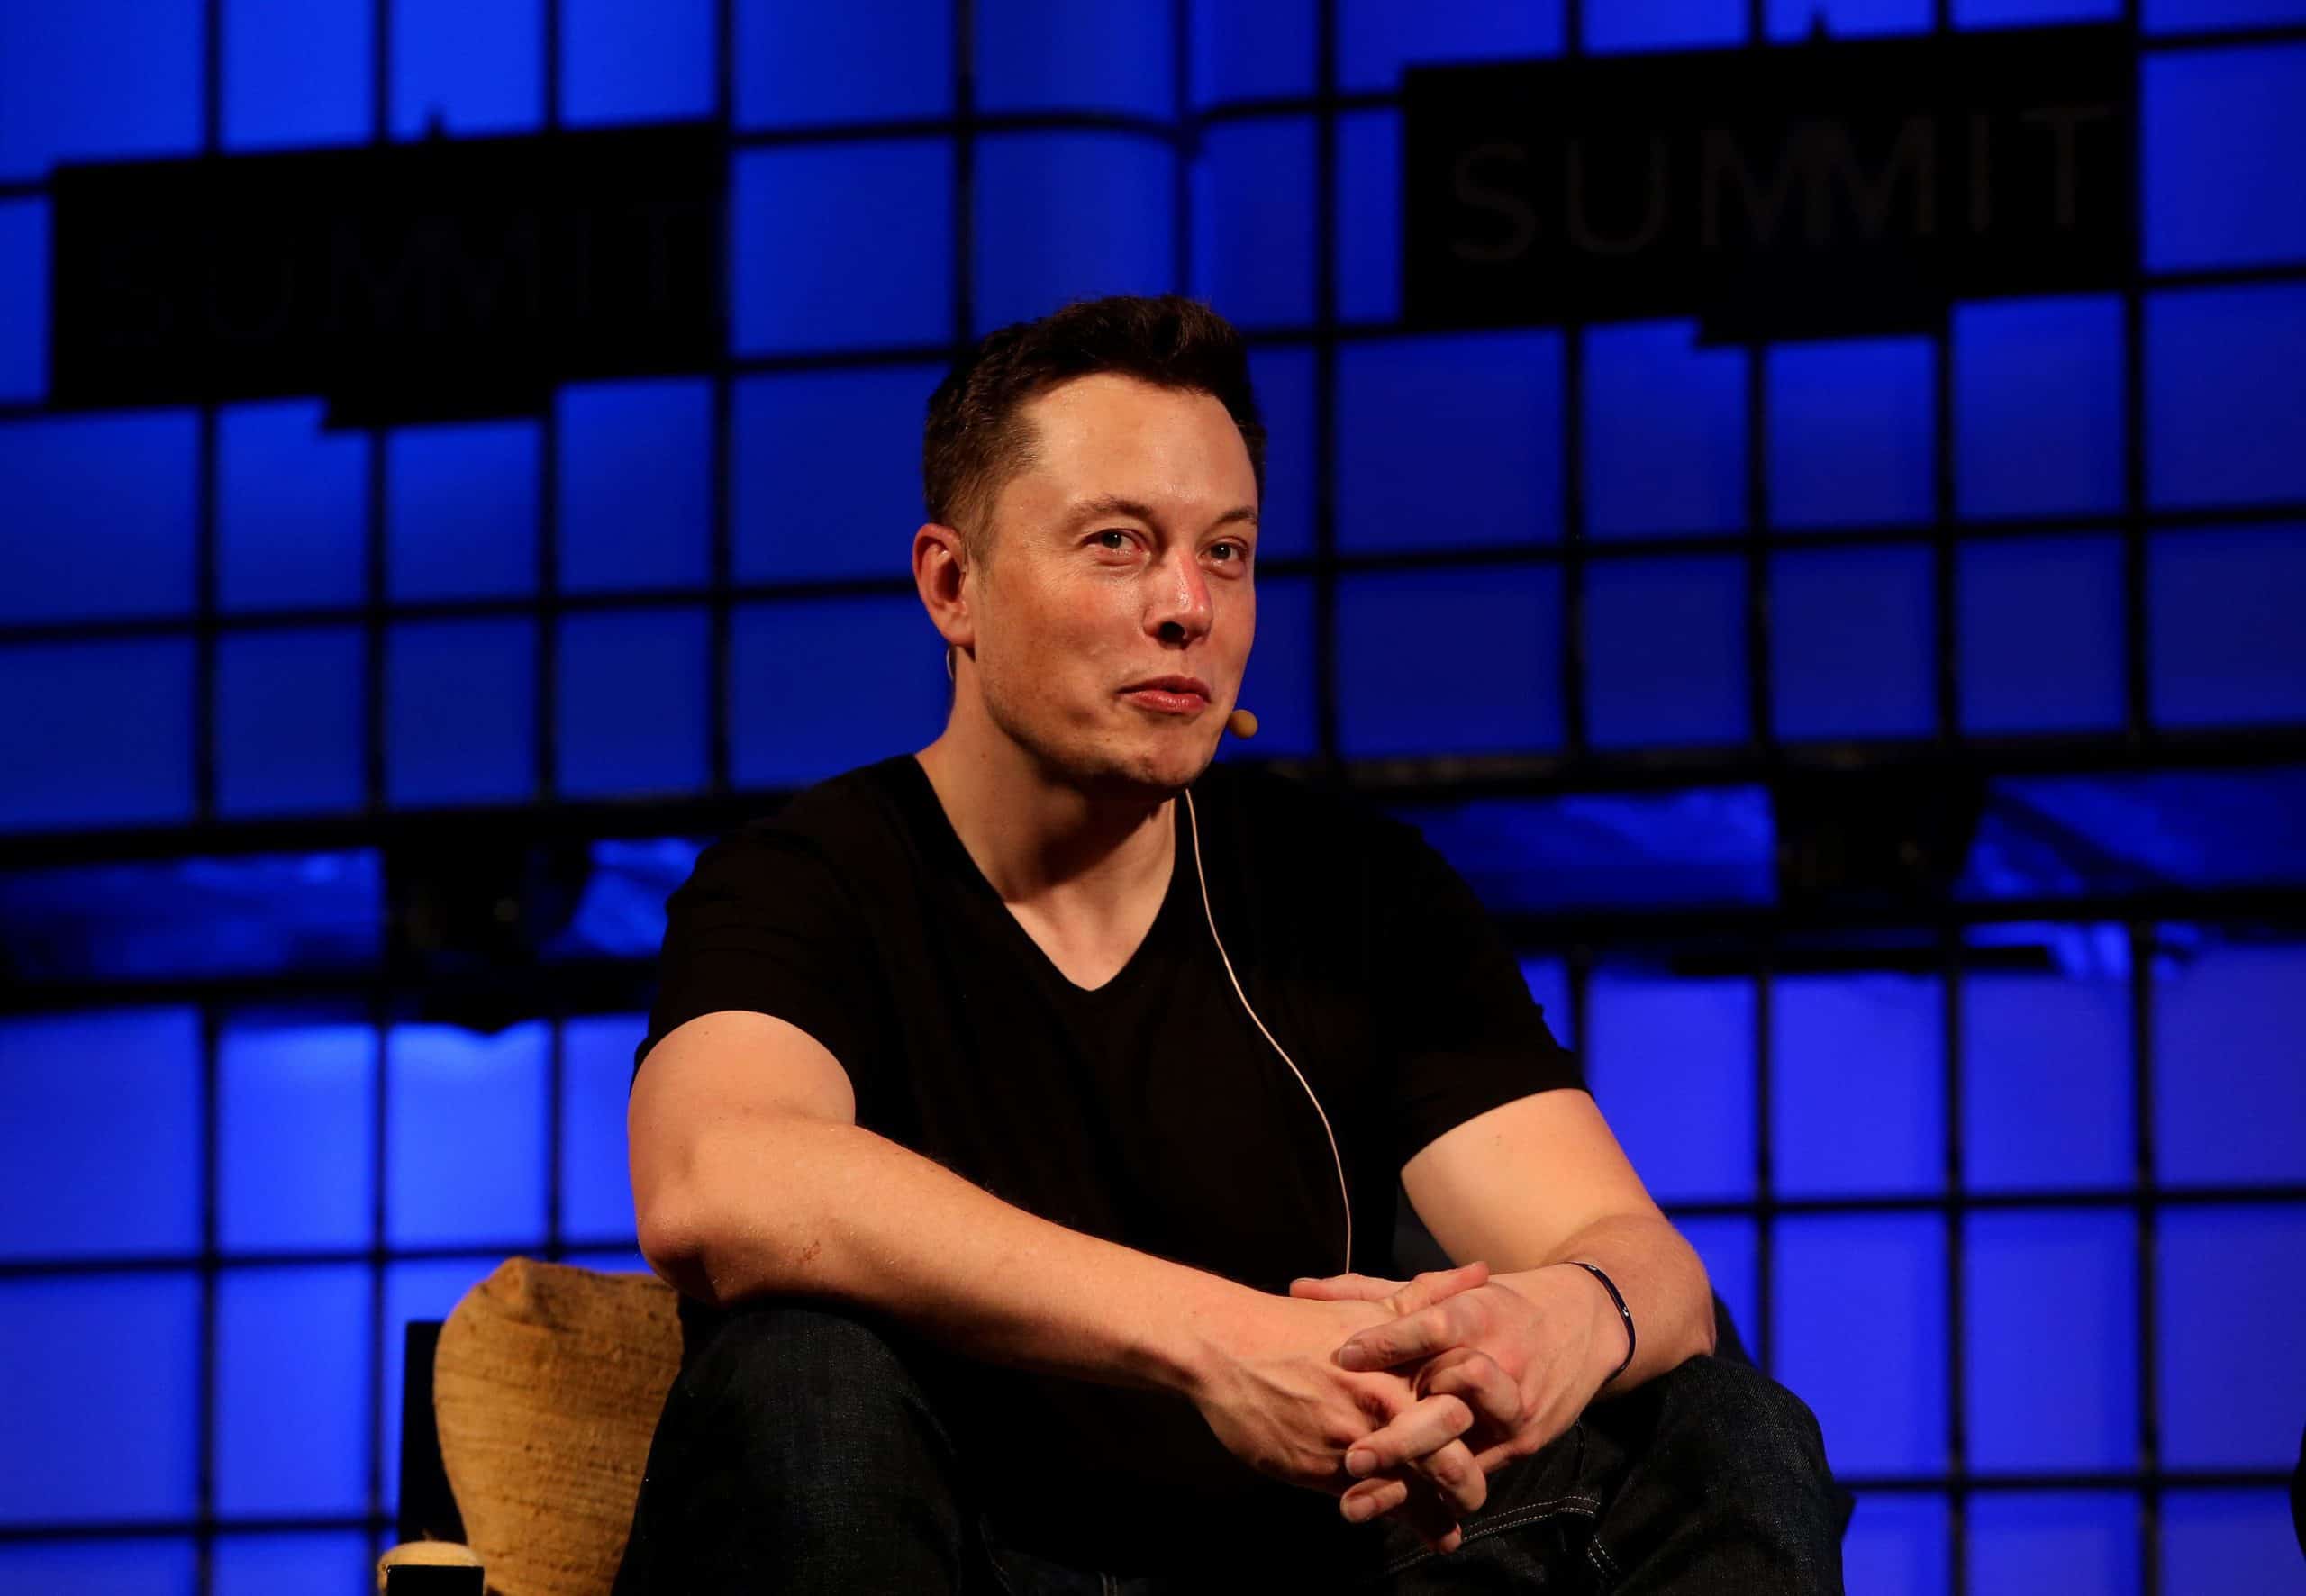 14 million vote as Elon Musk vows to step down in Twitter poll